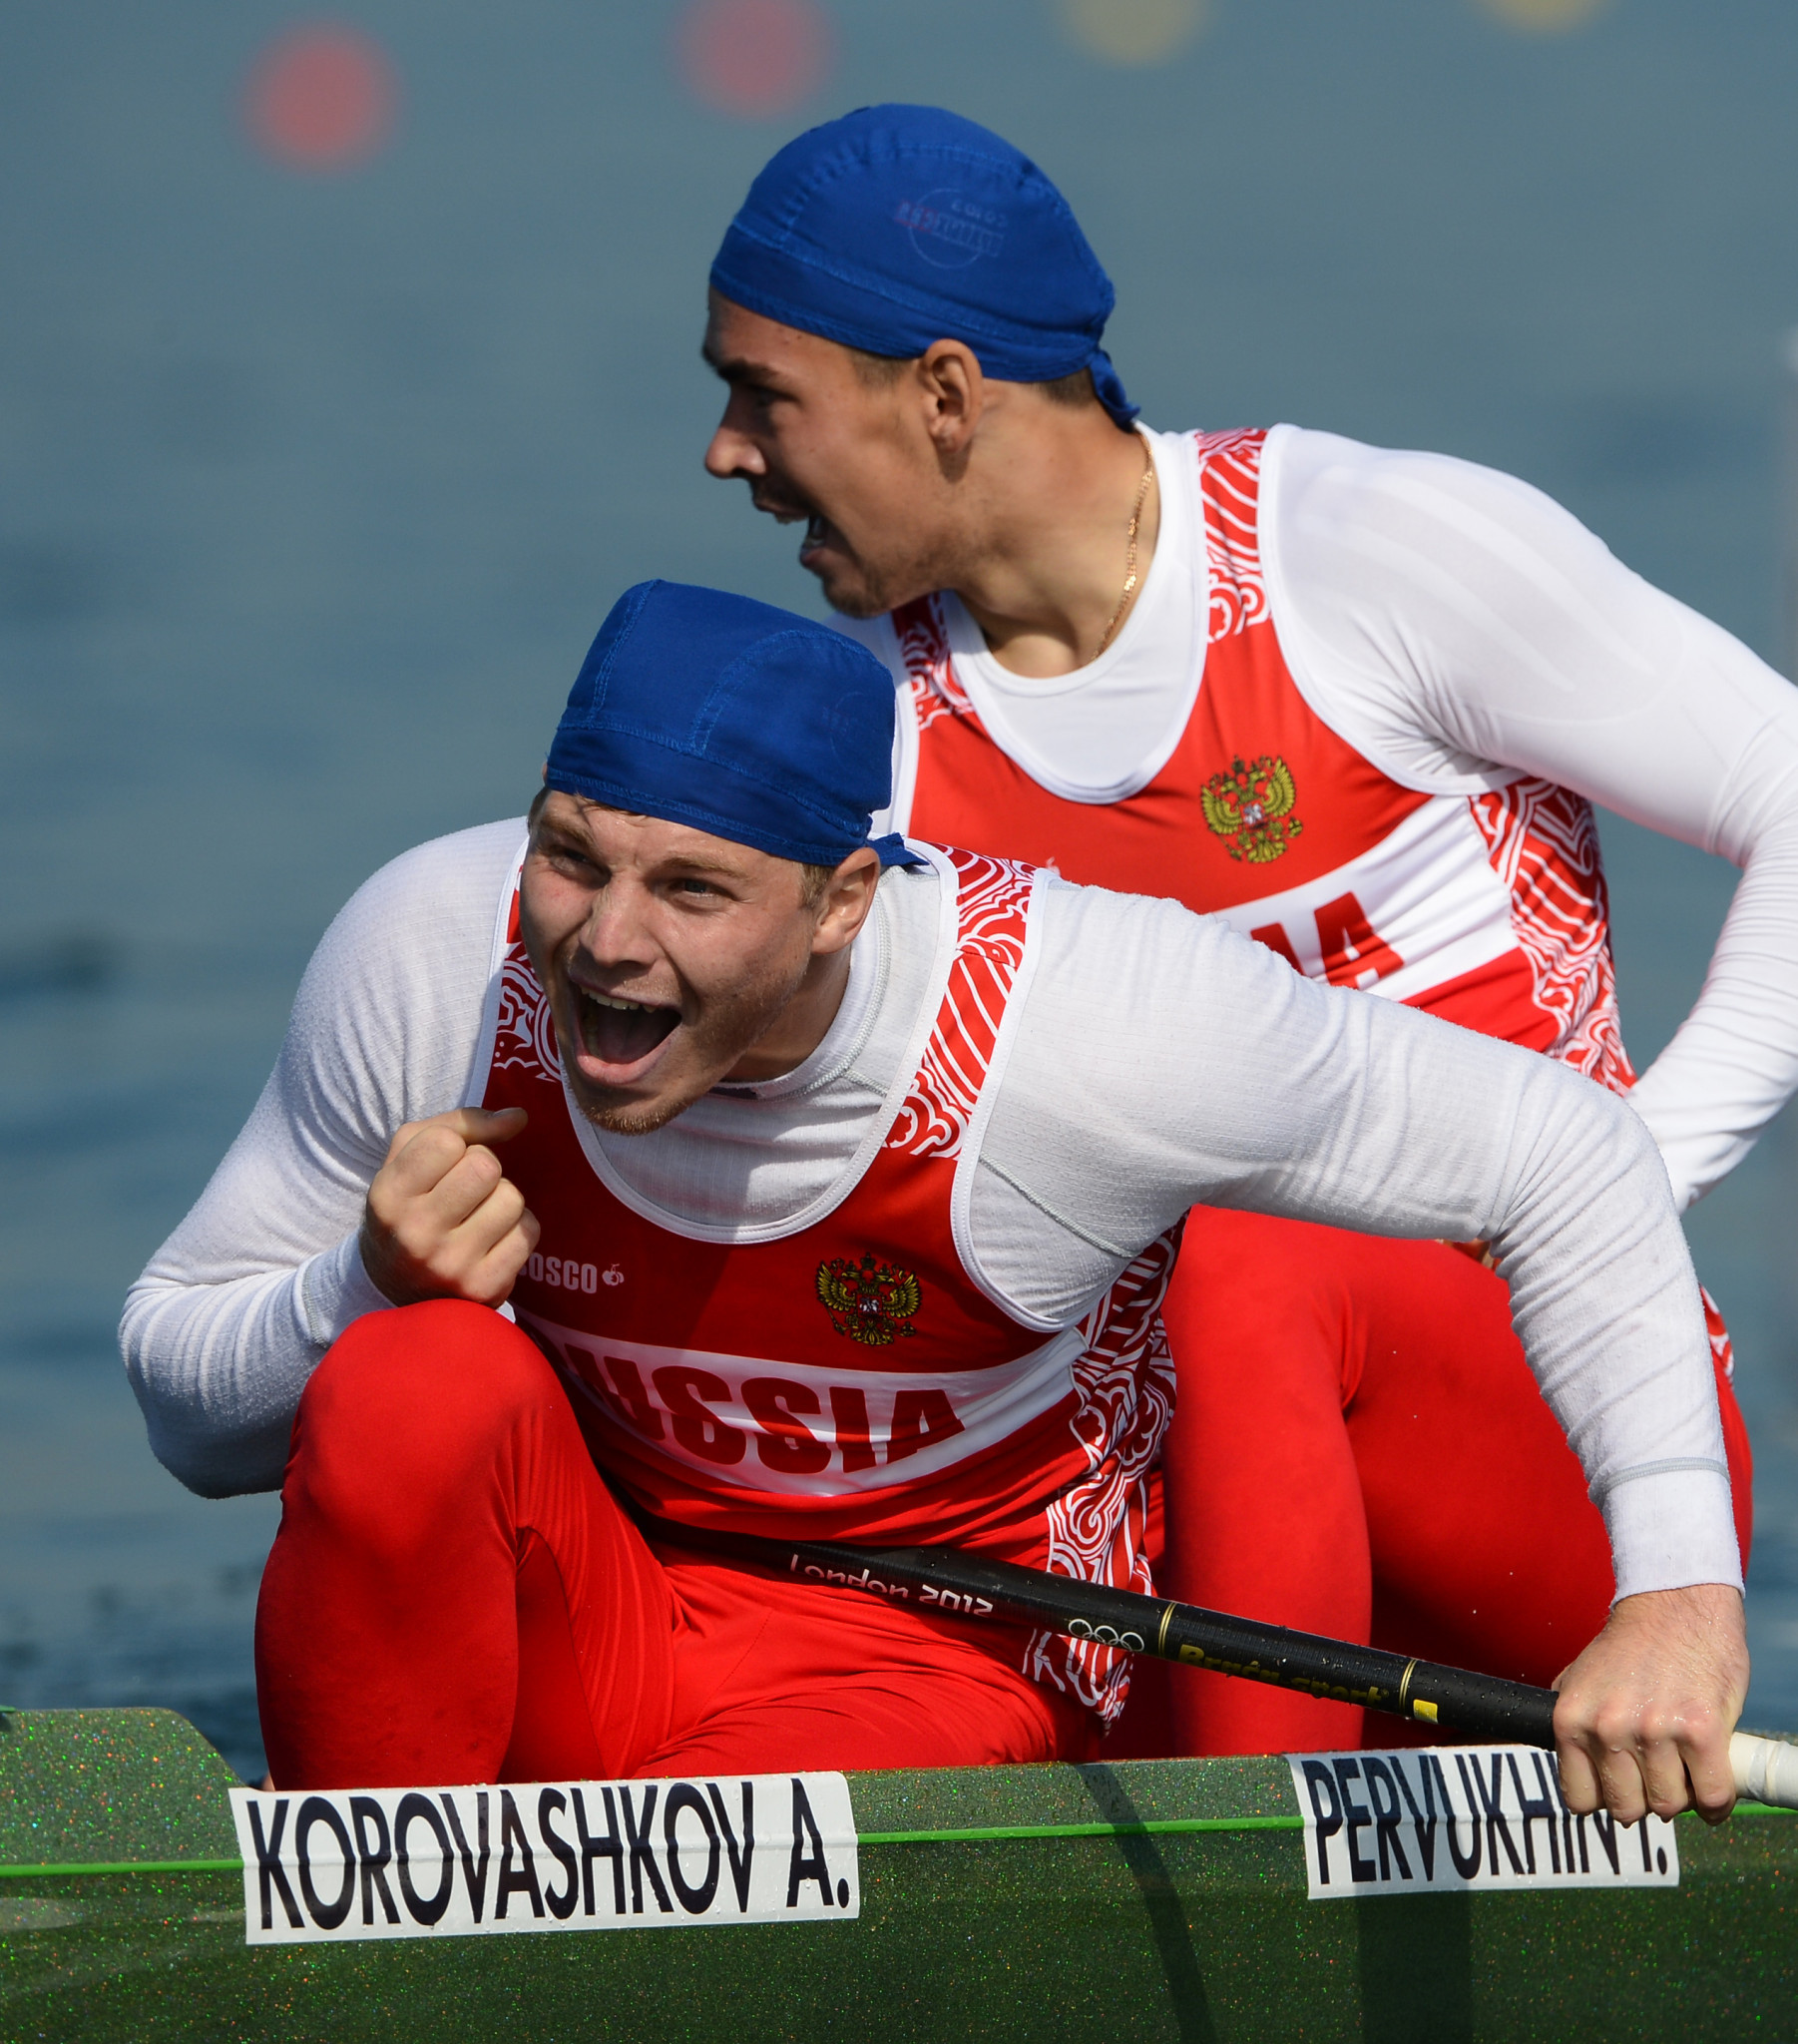 Russian sprint canoeist banned for doping less than a month after RUSADA reinstatement